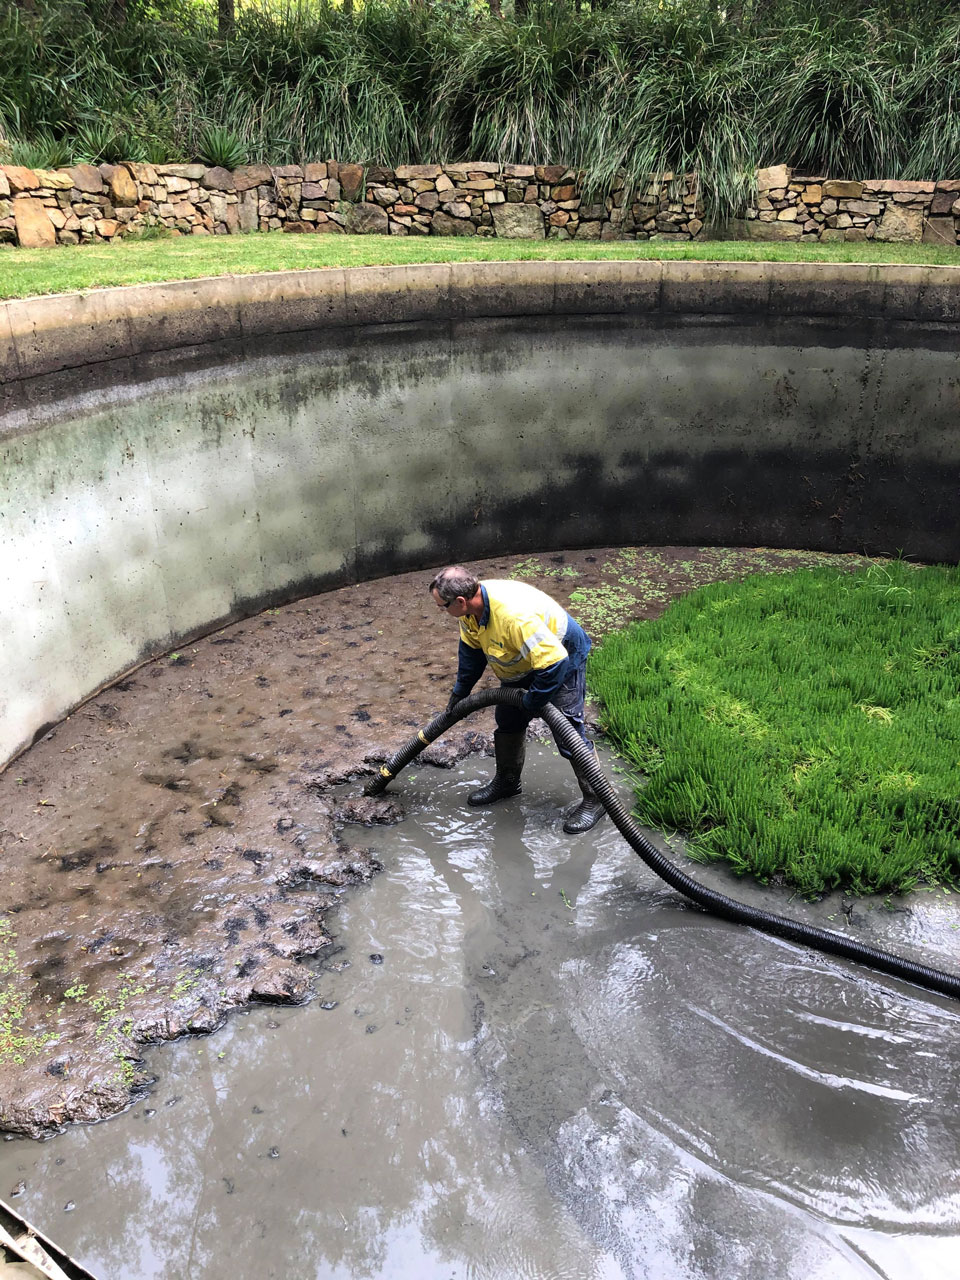 Wet vacuuming of water and waste from a rainwater tank being demonstrated by a member of the South Vac crew.